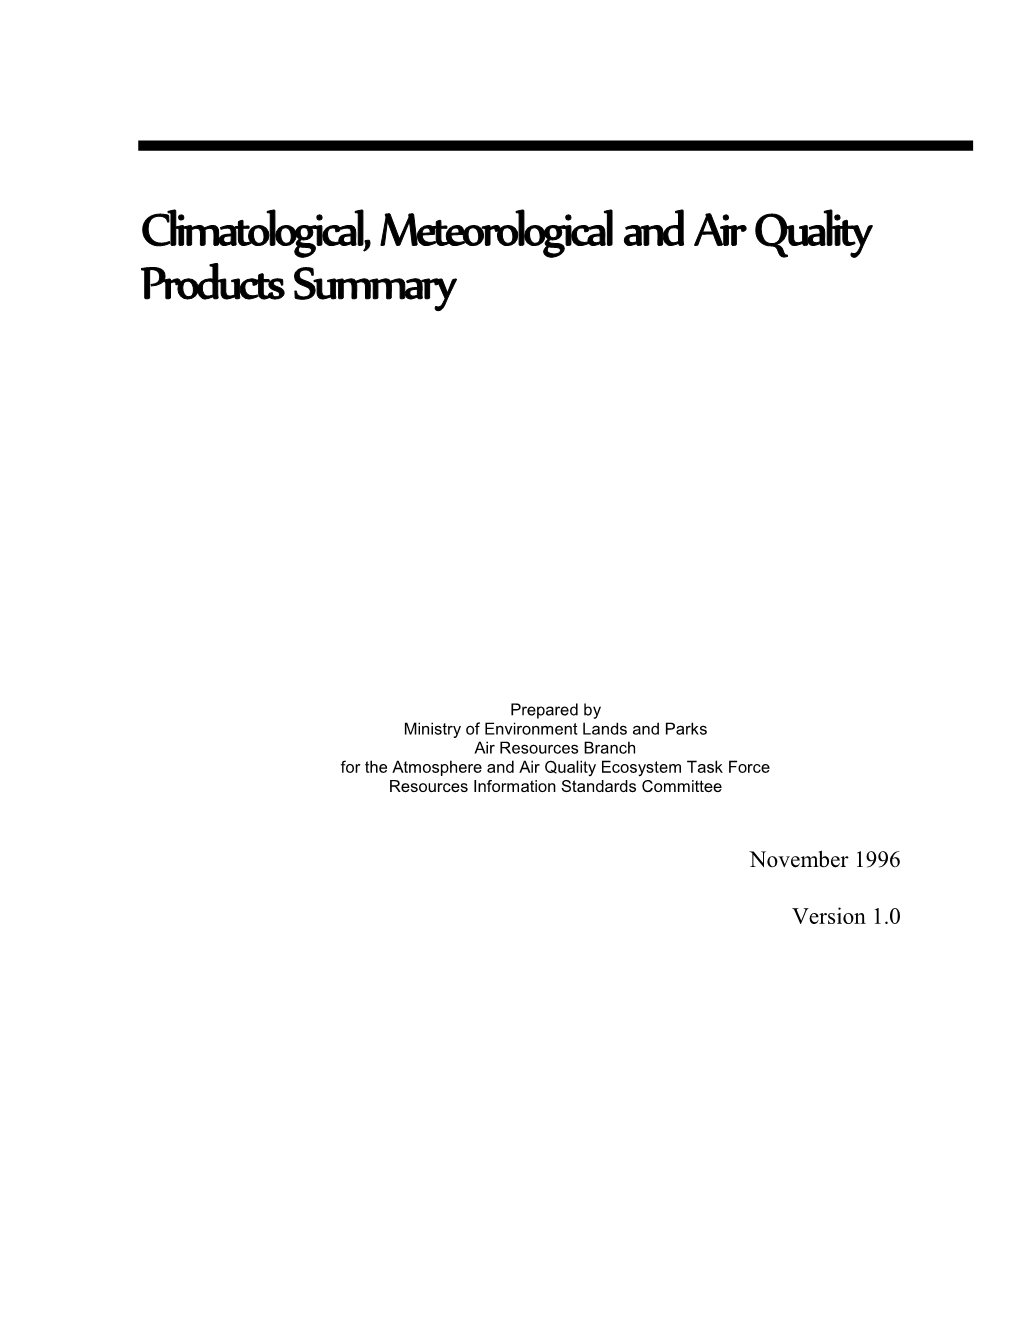 Climatological, Meteorological and Air Quality Products Summary